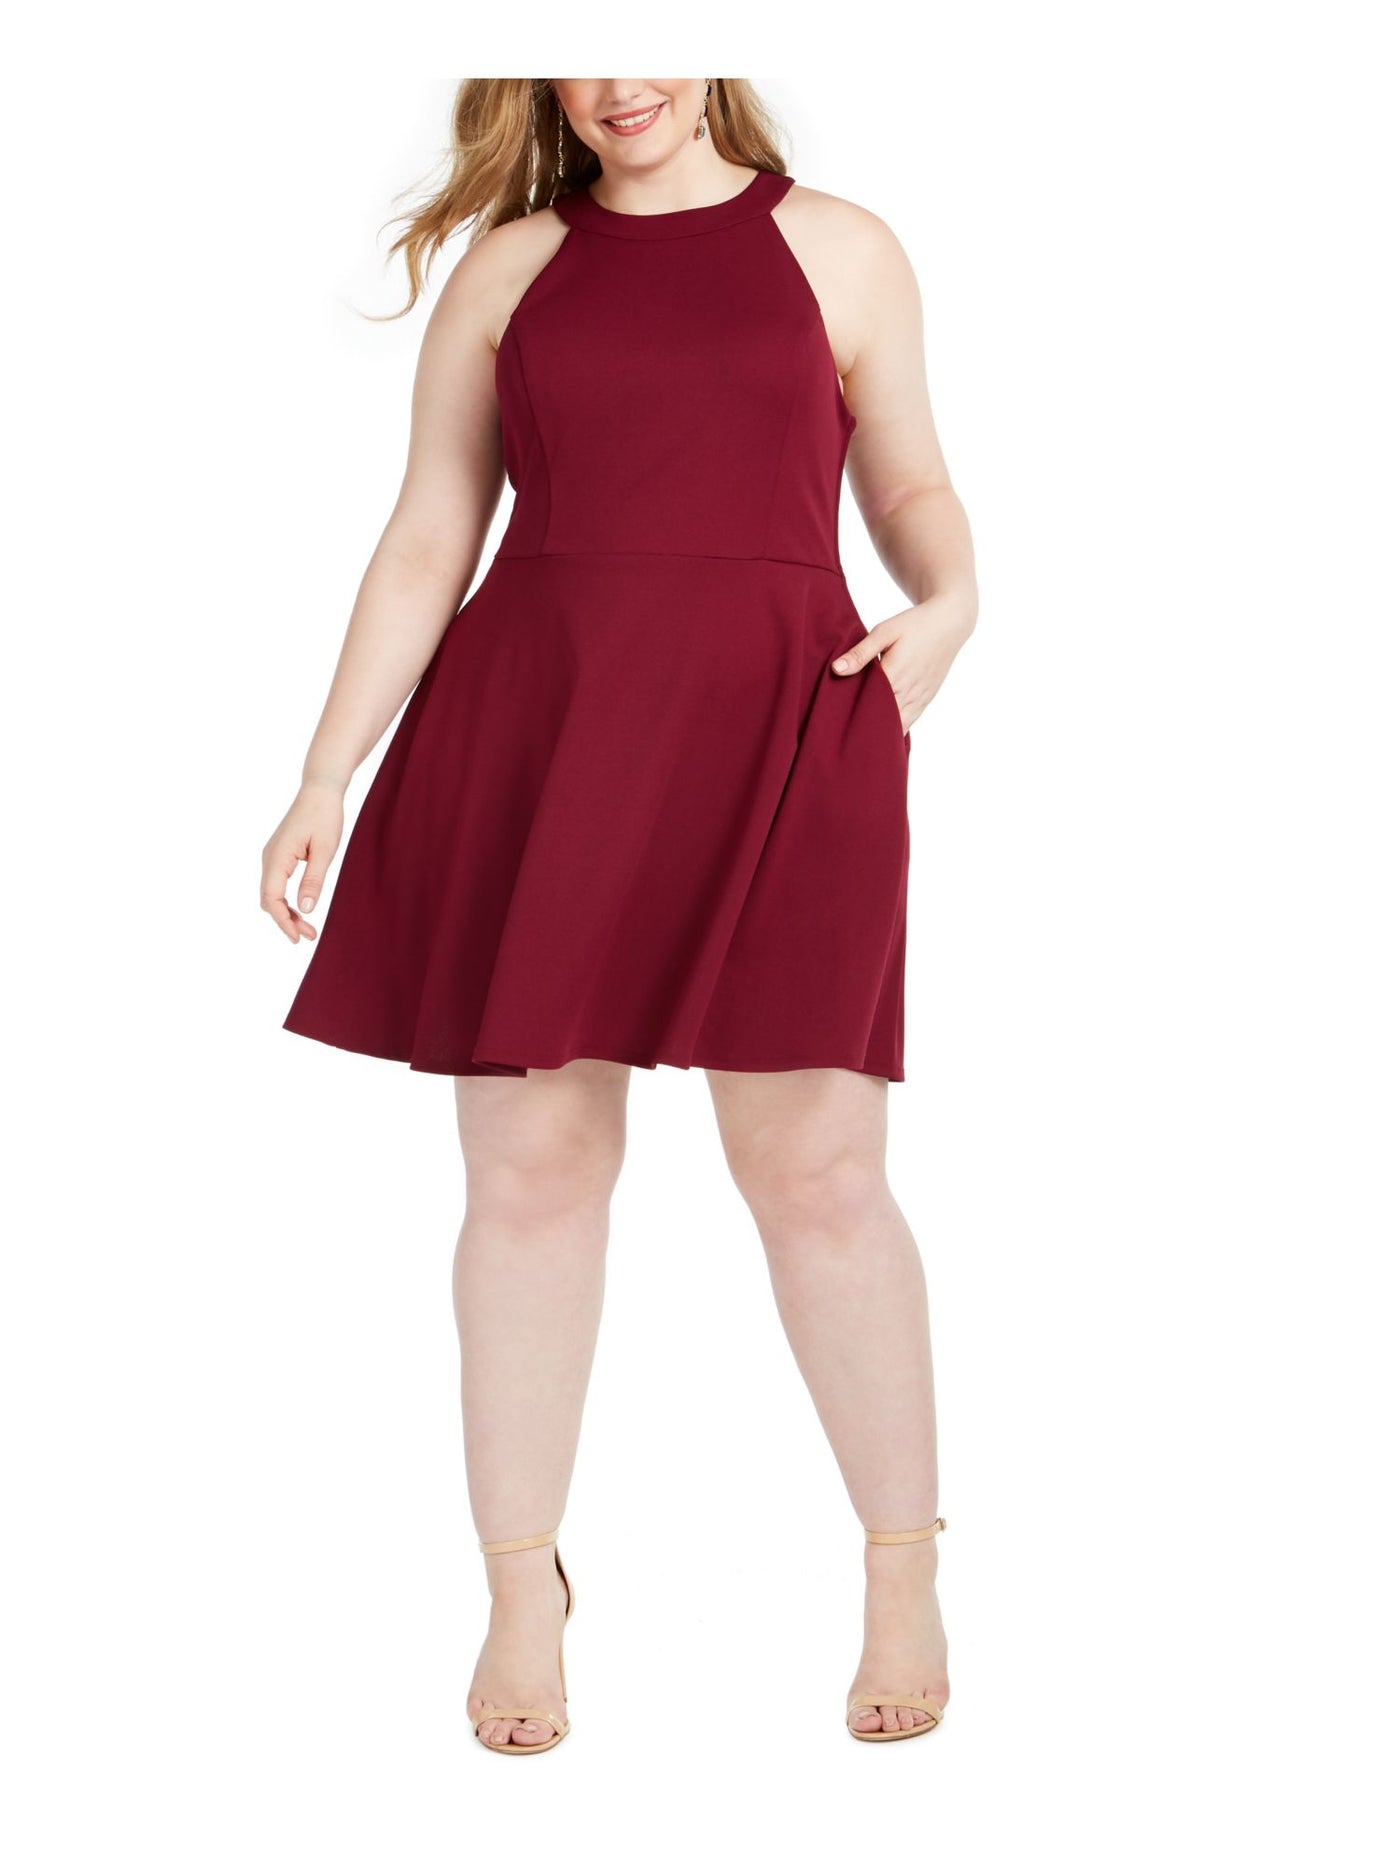 SPEECHLESS Womens Burgundy Cut Out   Bowtie Sleeveless Halter Above The Knee Fit + Flare Dress Juniors 24